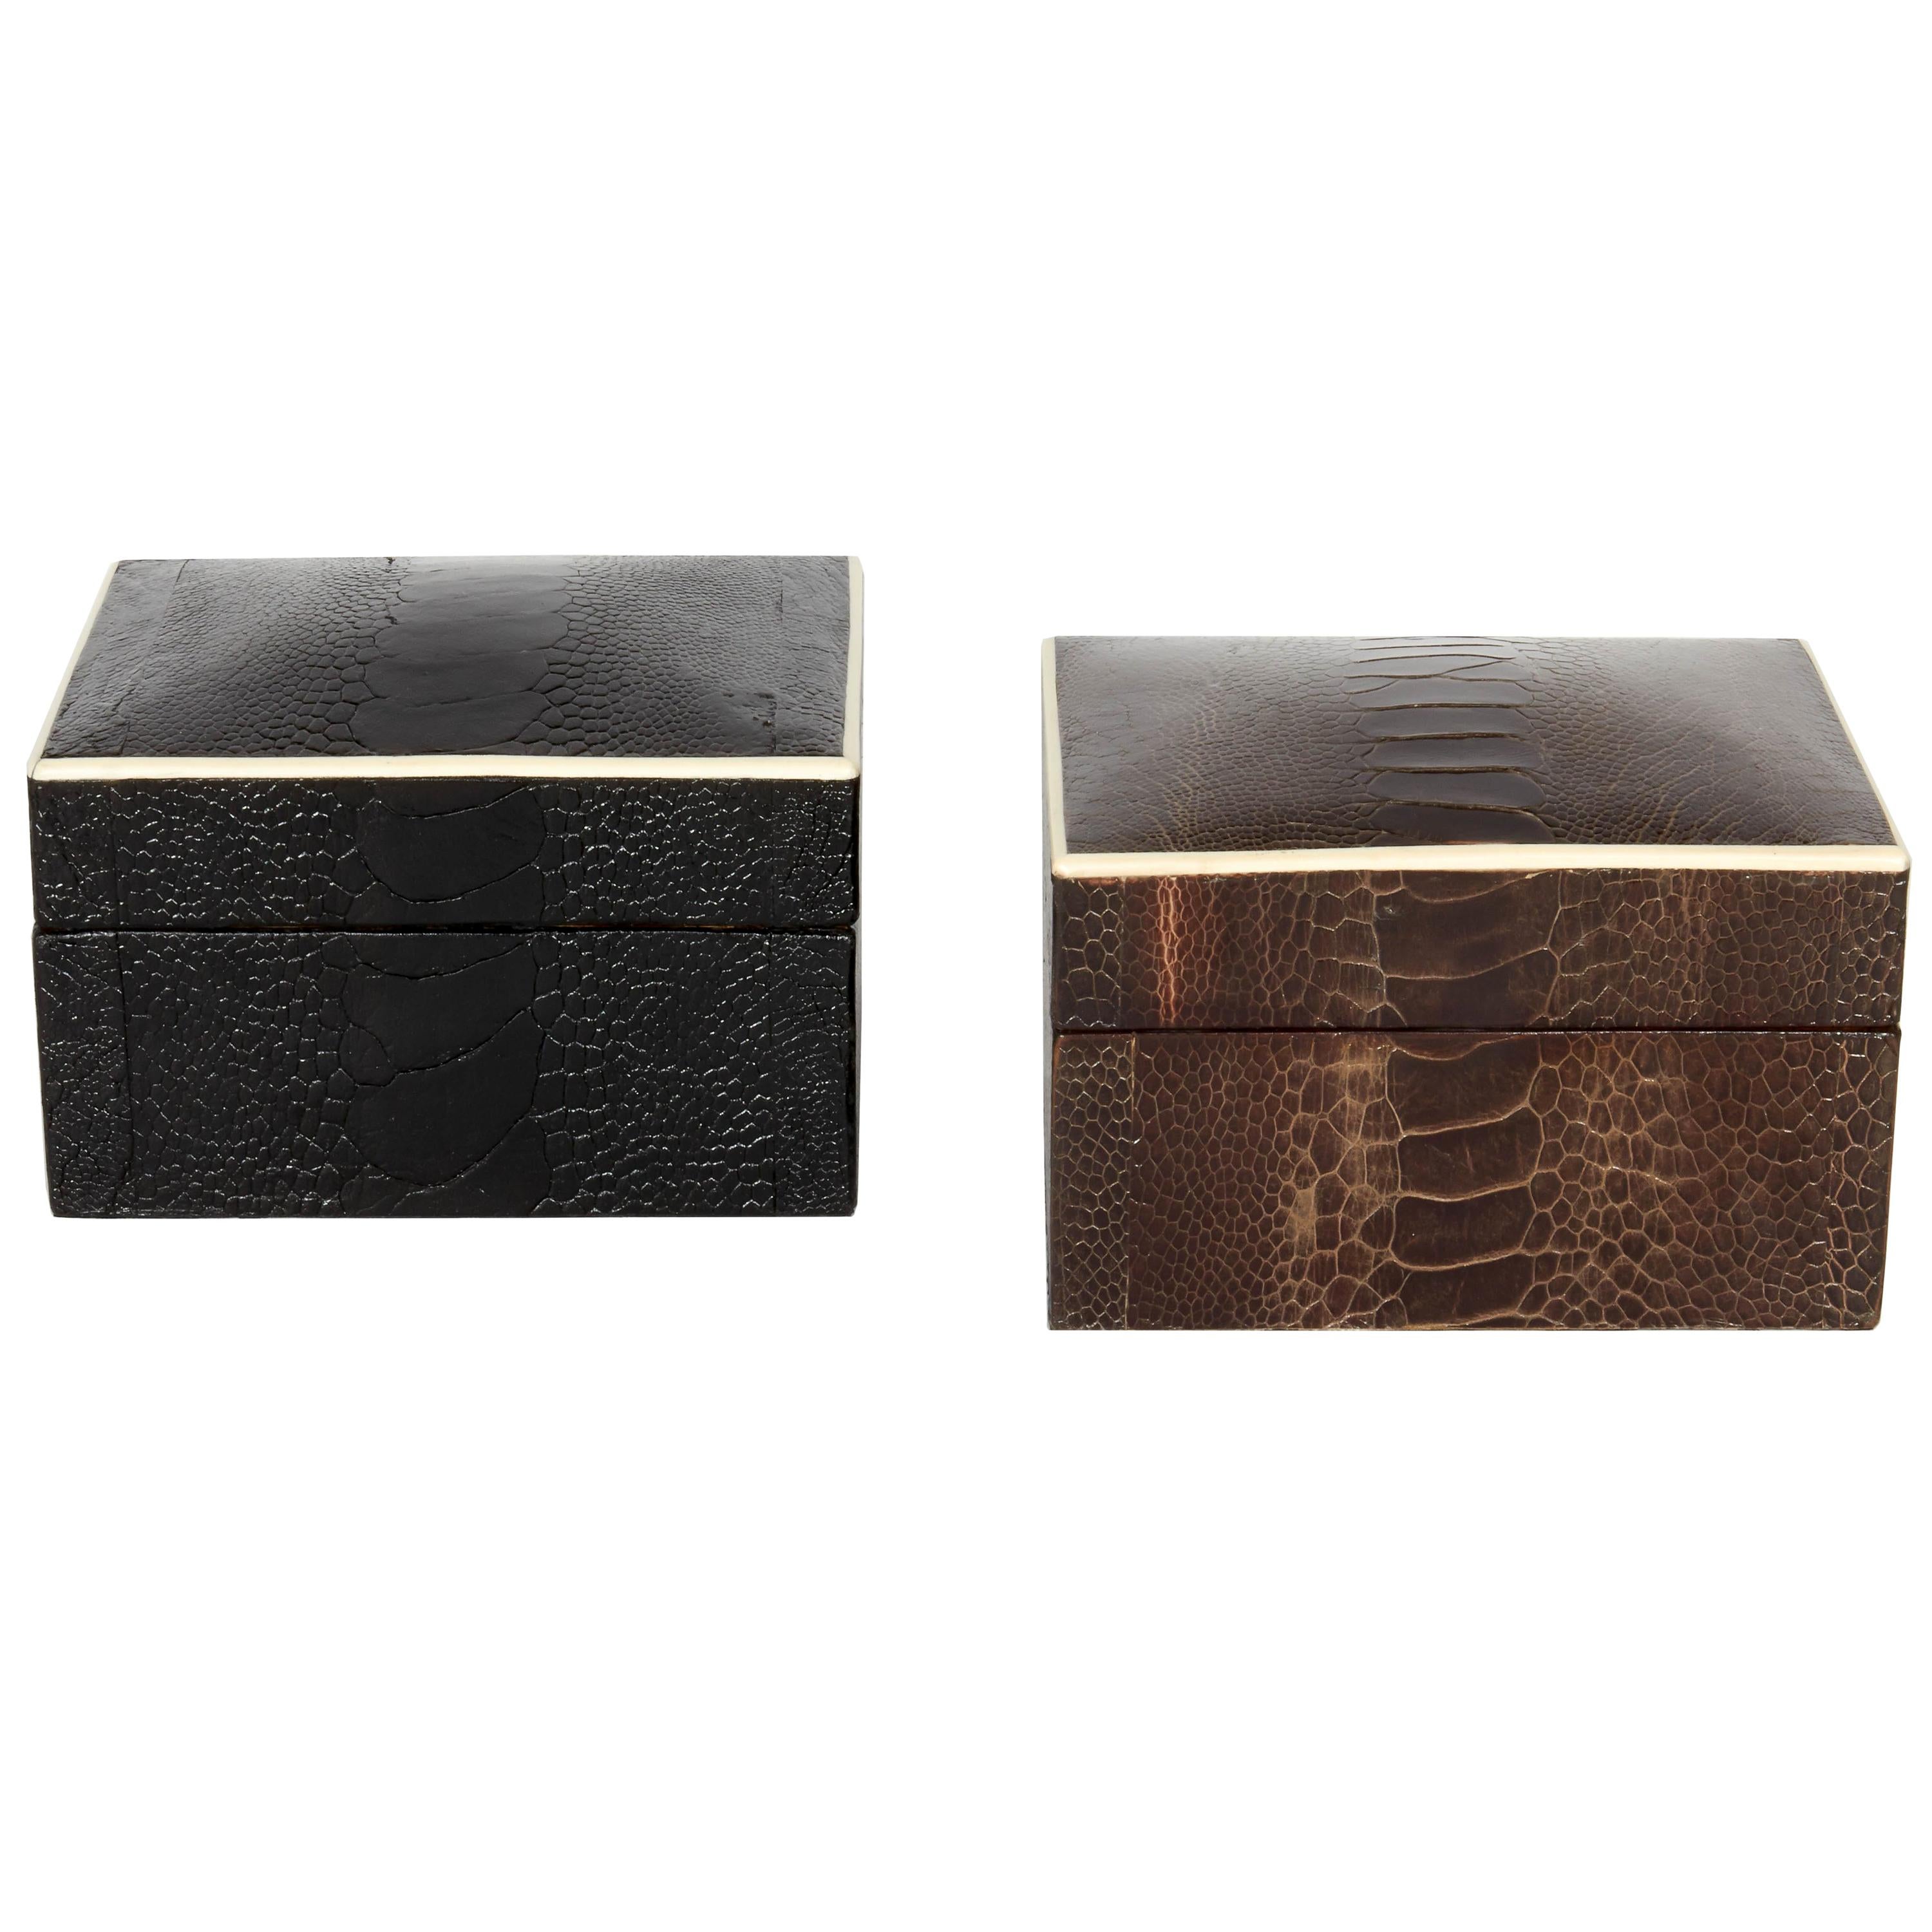 Pair of Exotic Ostrich Leather Decorative Boxes with Bone Inlay ‘Black/Espresso’